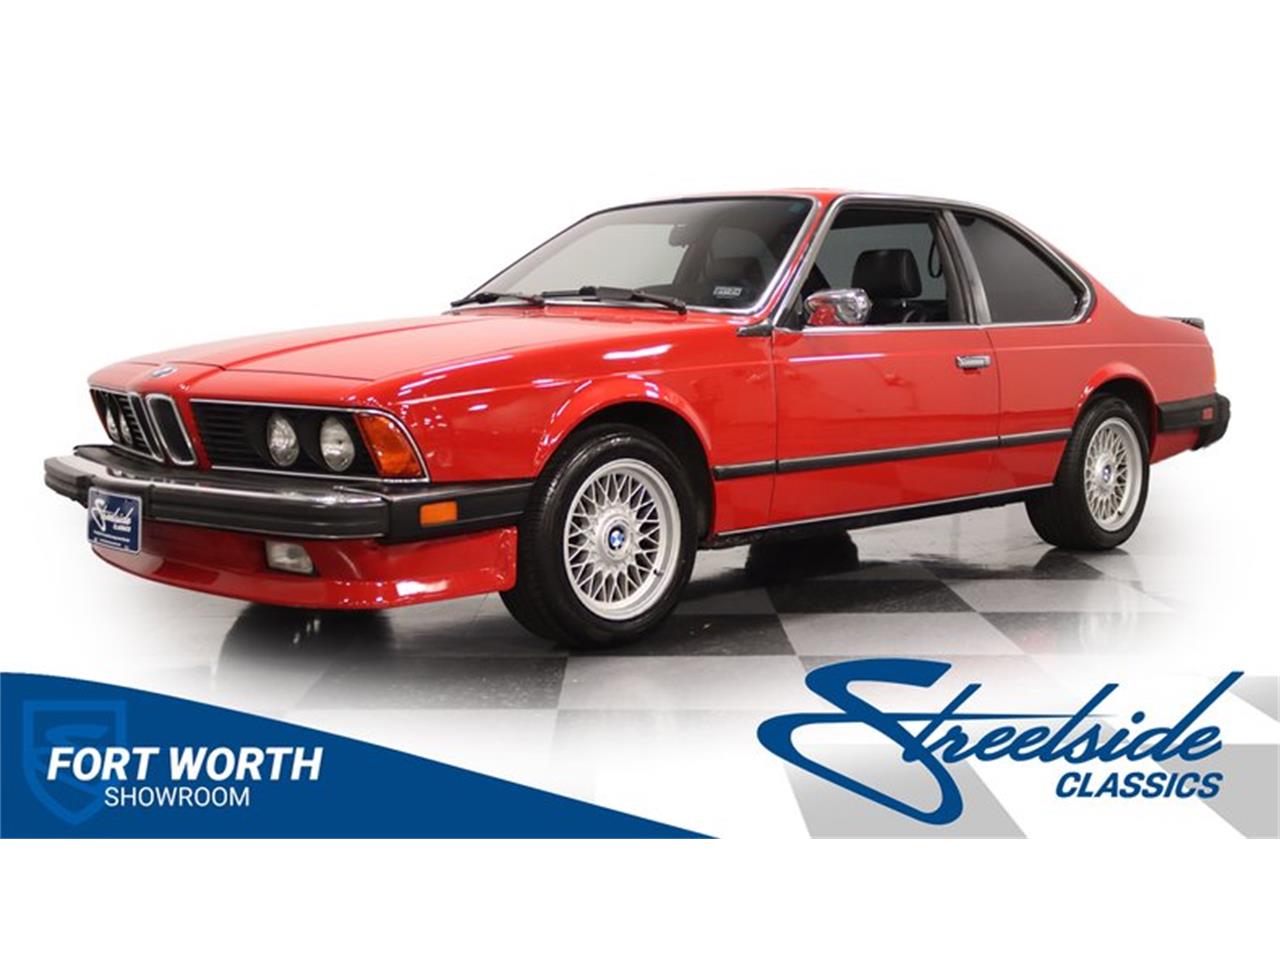 For Sale: 1986 BMW 635csi in Ft Worth, Texas for sale in Fort Worth, TX